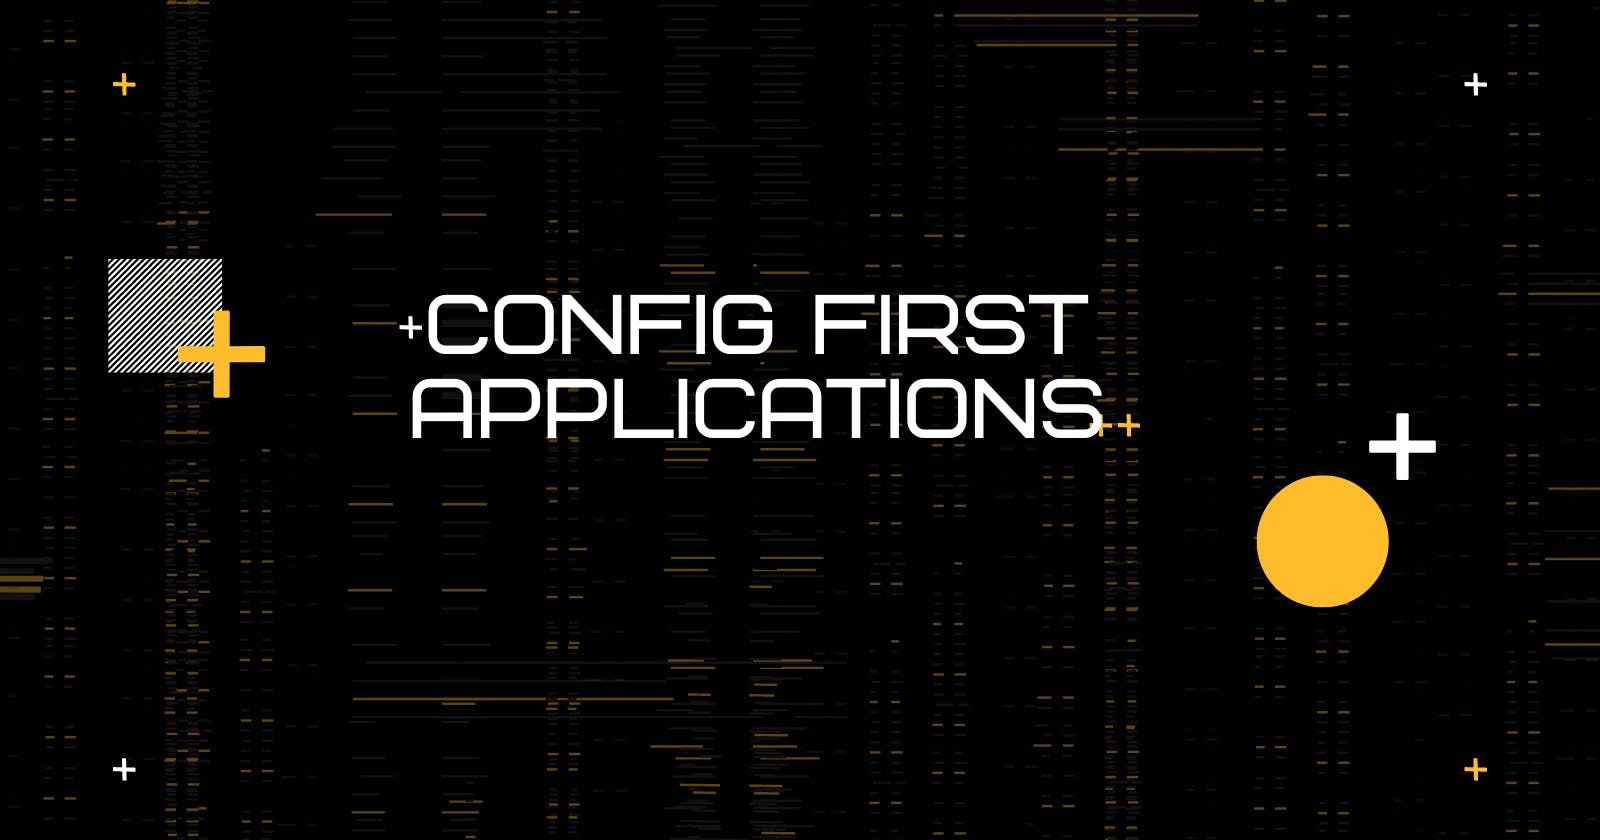 Configuration-first applications are the future